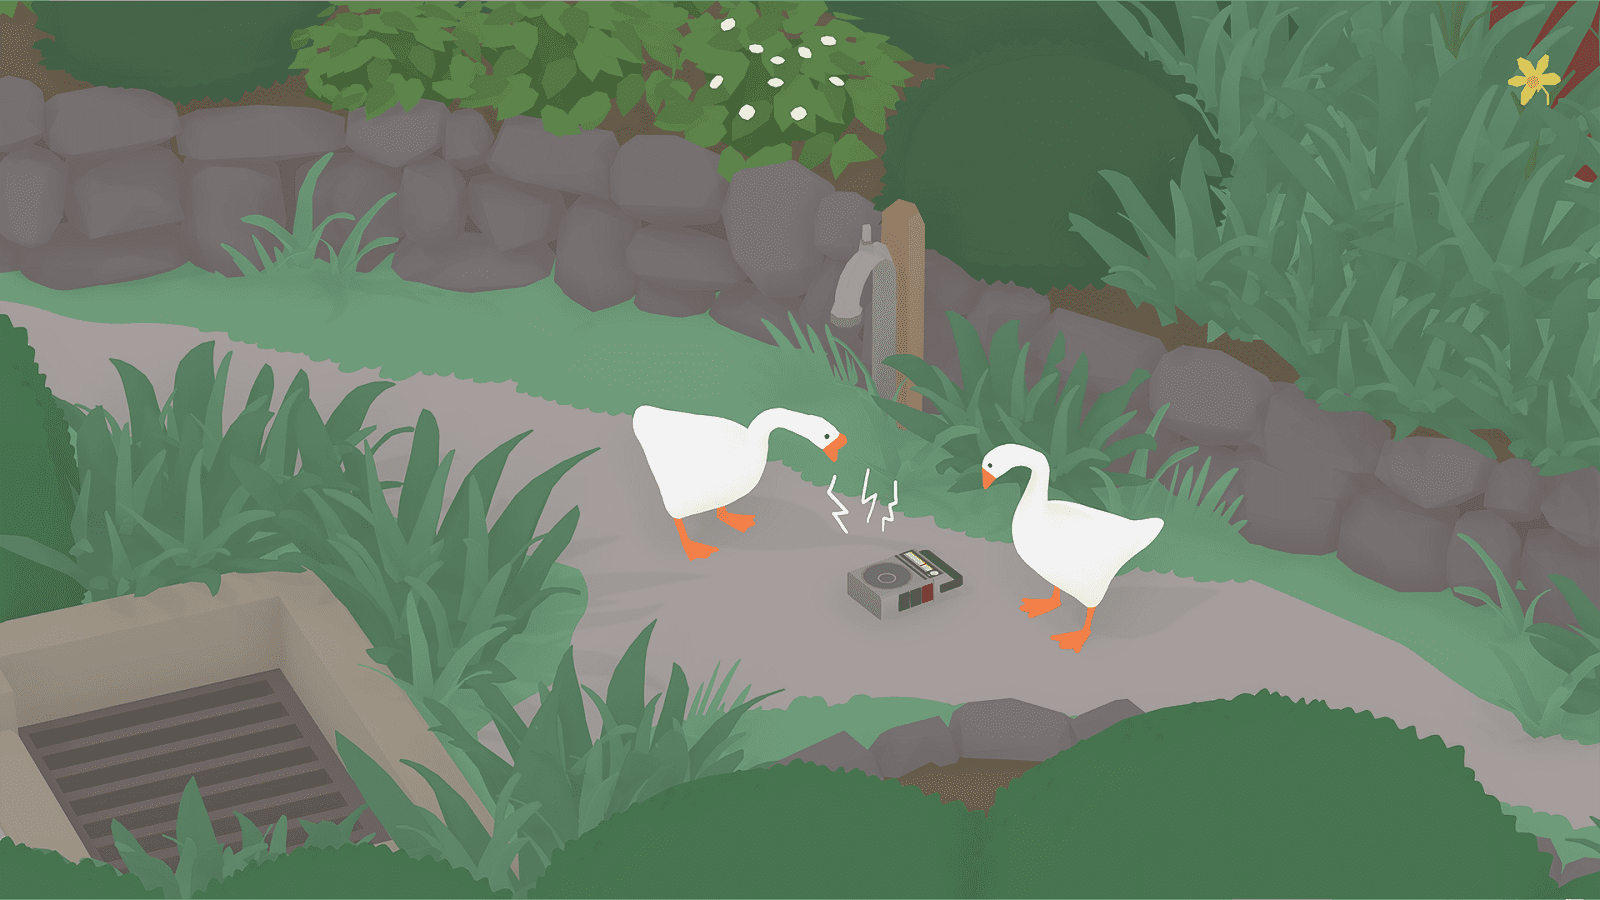 Untitled Goose Game by House House, Panic